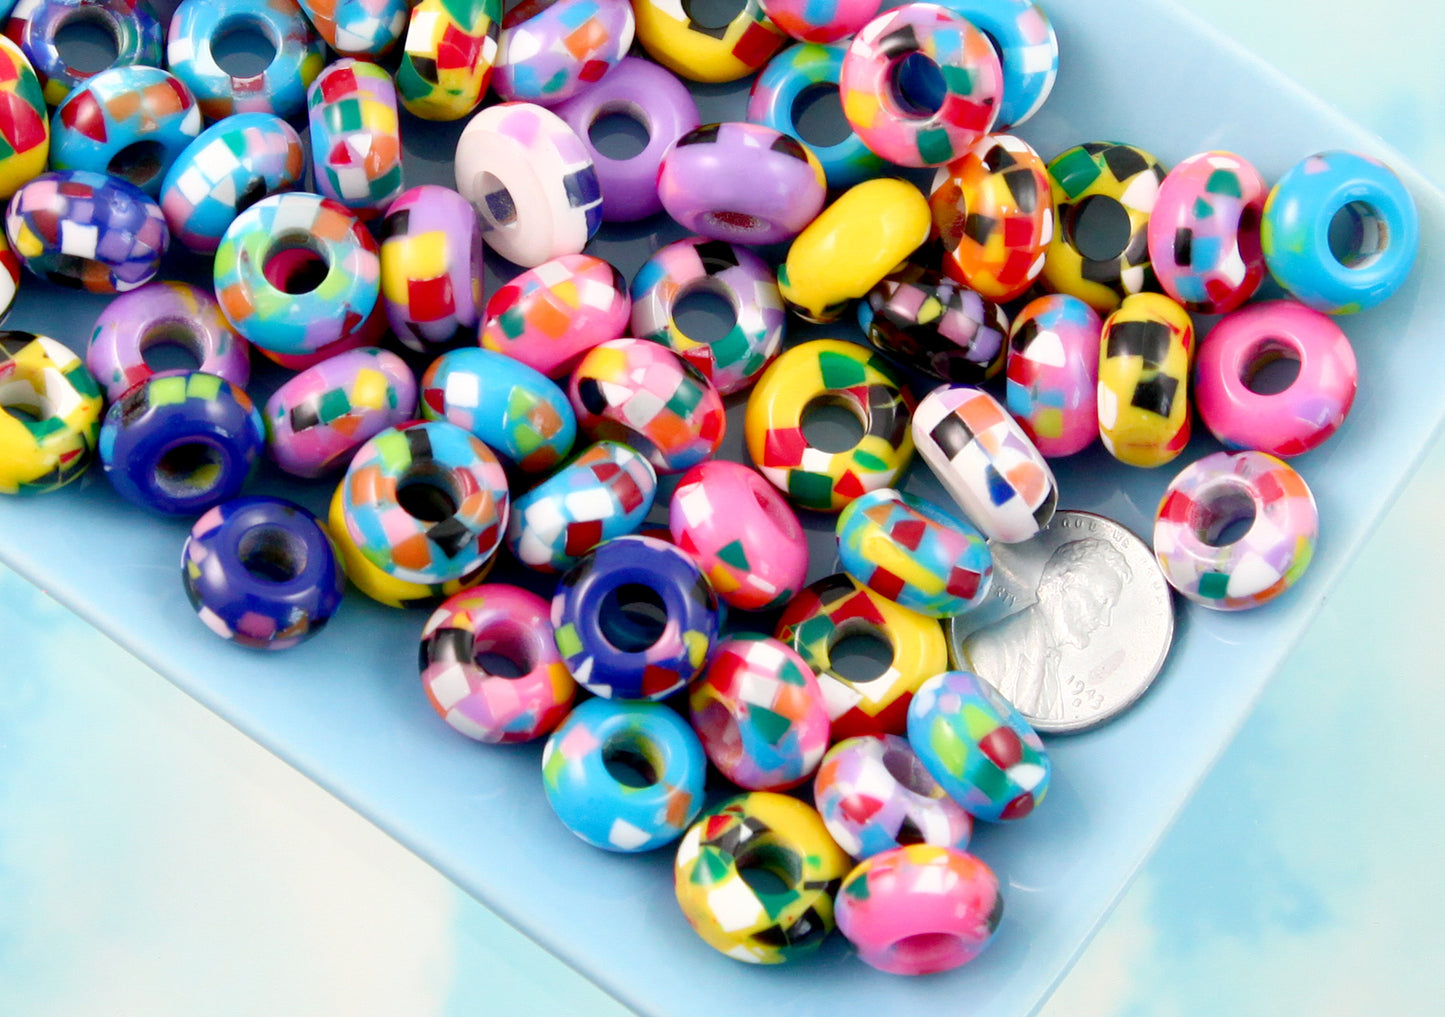 Colorful Resin Beads - 13mm Large Hole Confetti Rondelle Wide Euro Style Resin Beads - Super High Quality - 30 pcs set